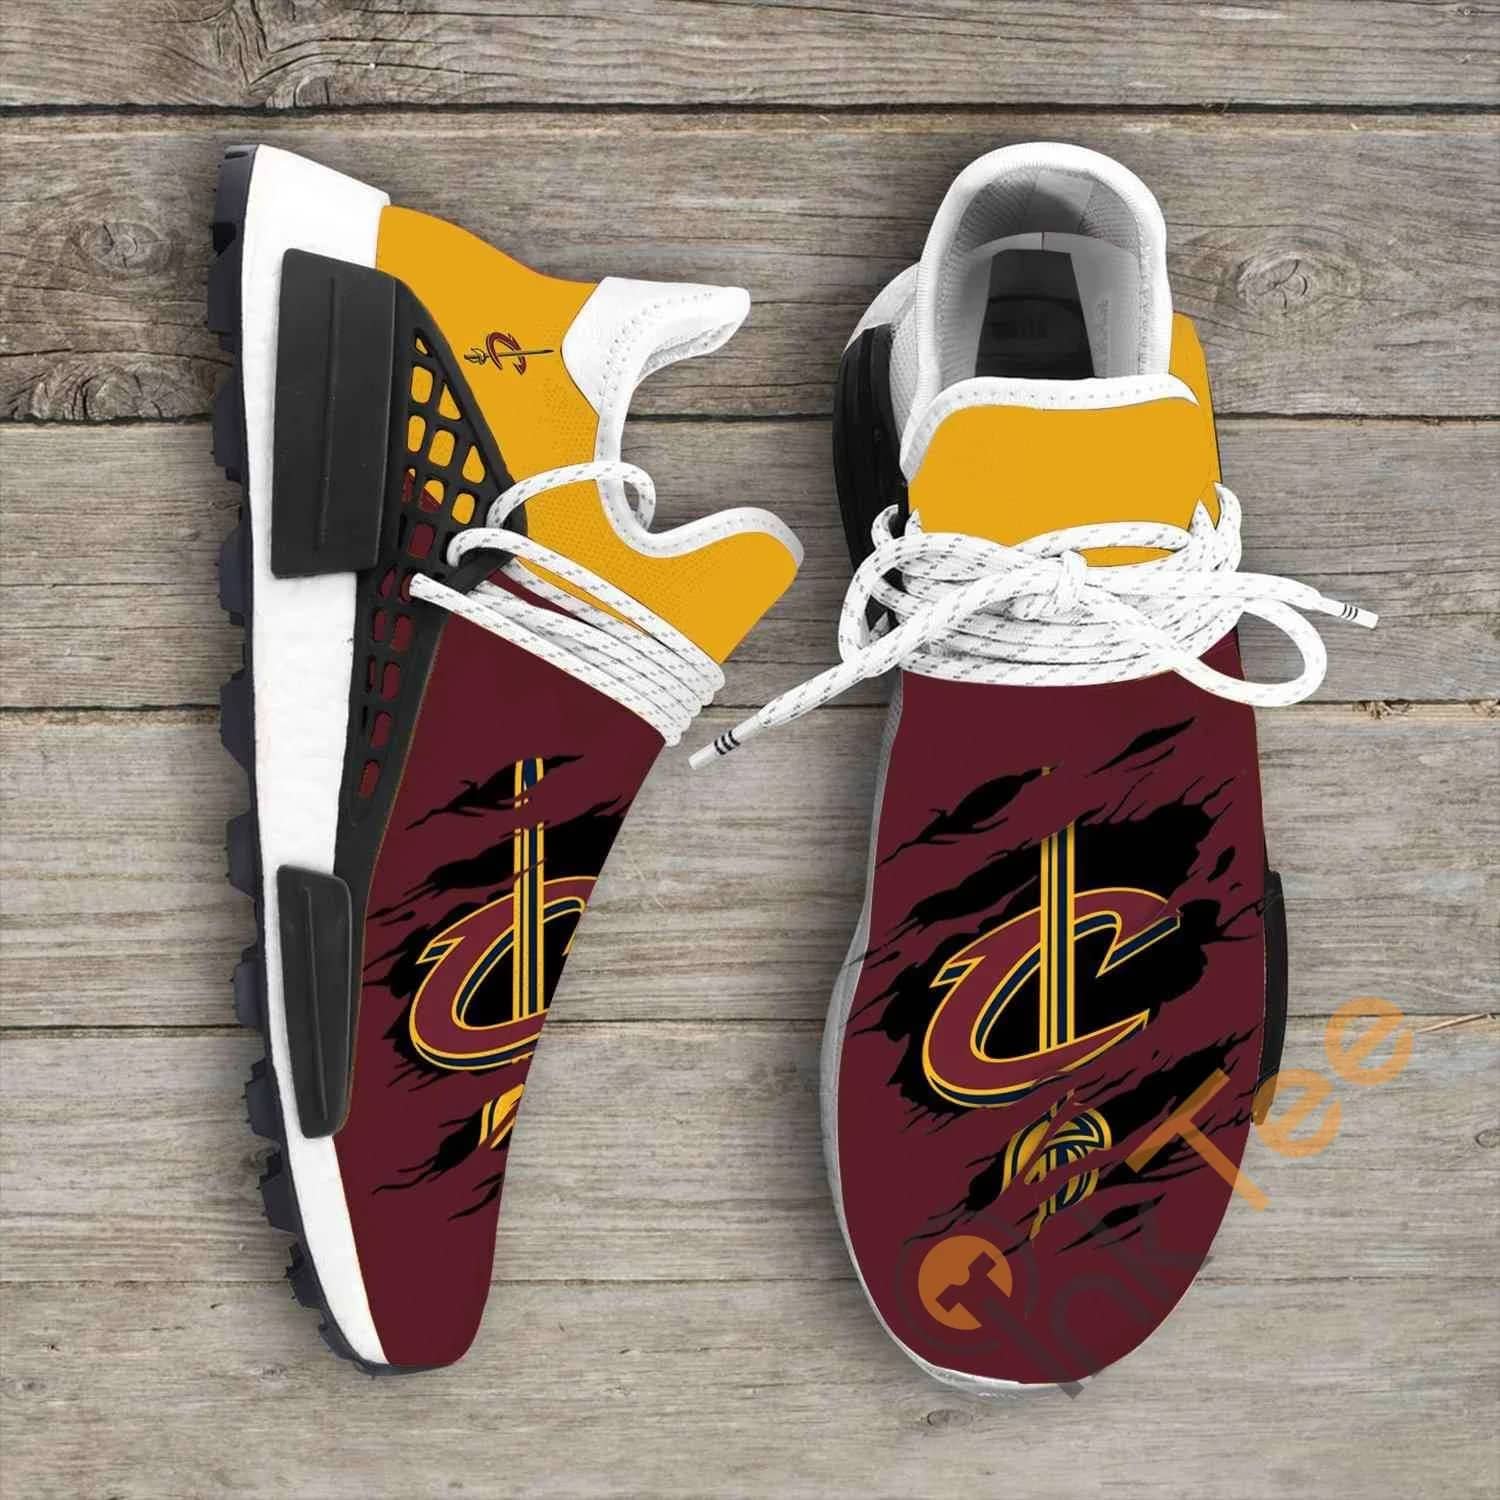 Cleveland Cavaliers Nba NMD Human Shoes